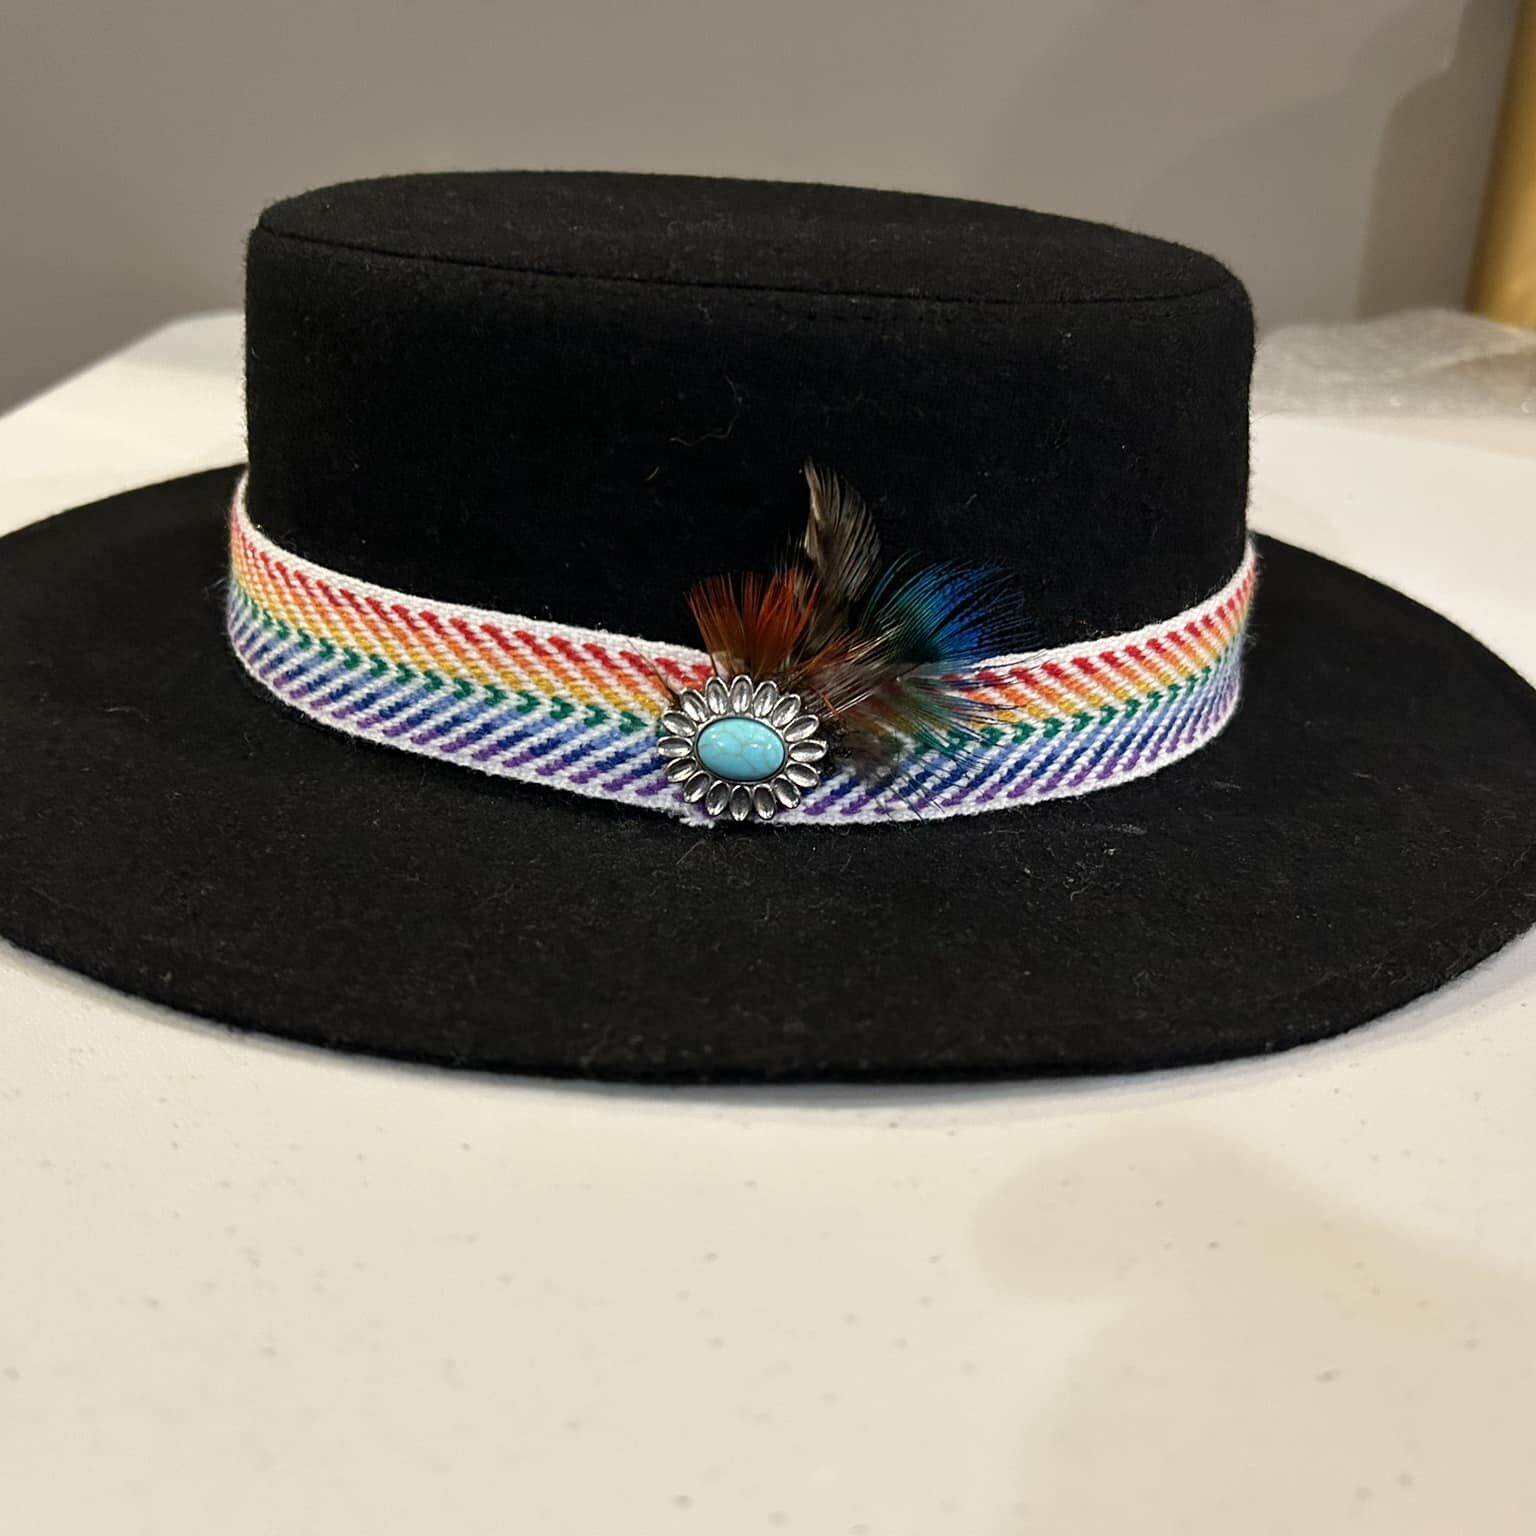 Ronald Joseph Kerr Side of black hat with ribbon, feathers and pendant